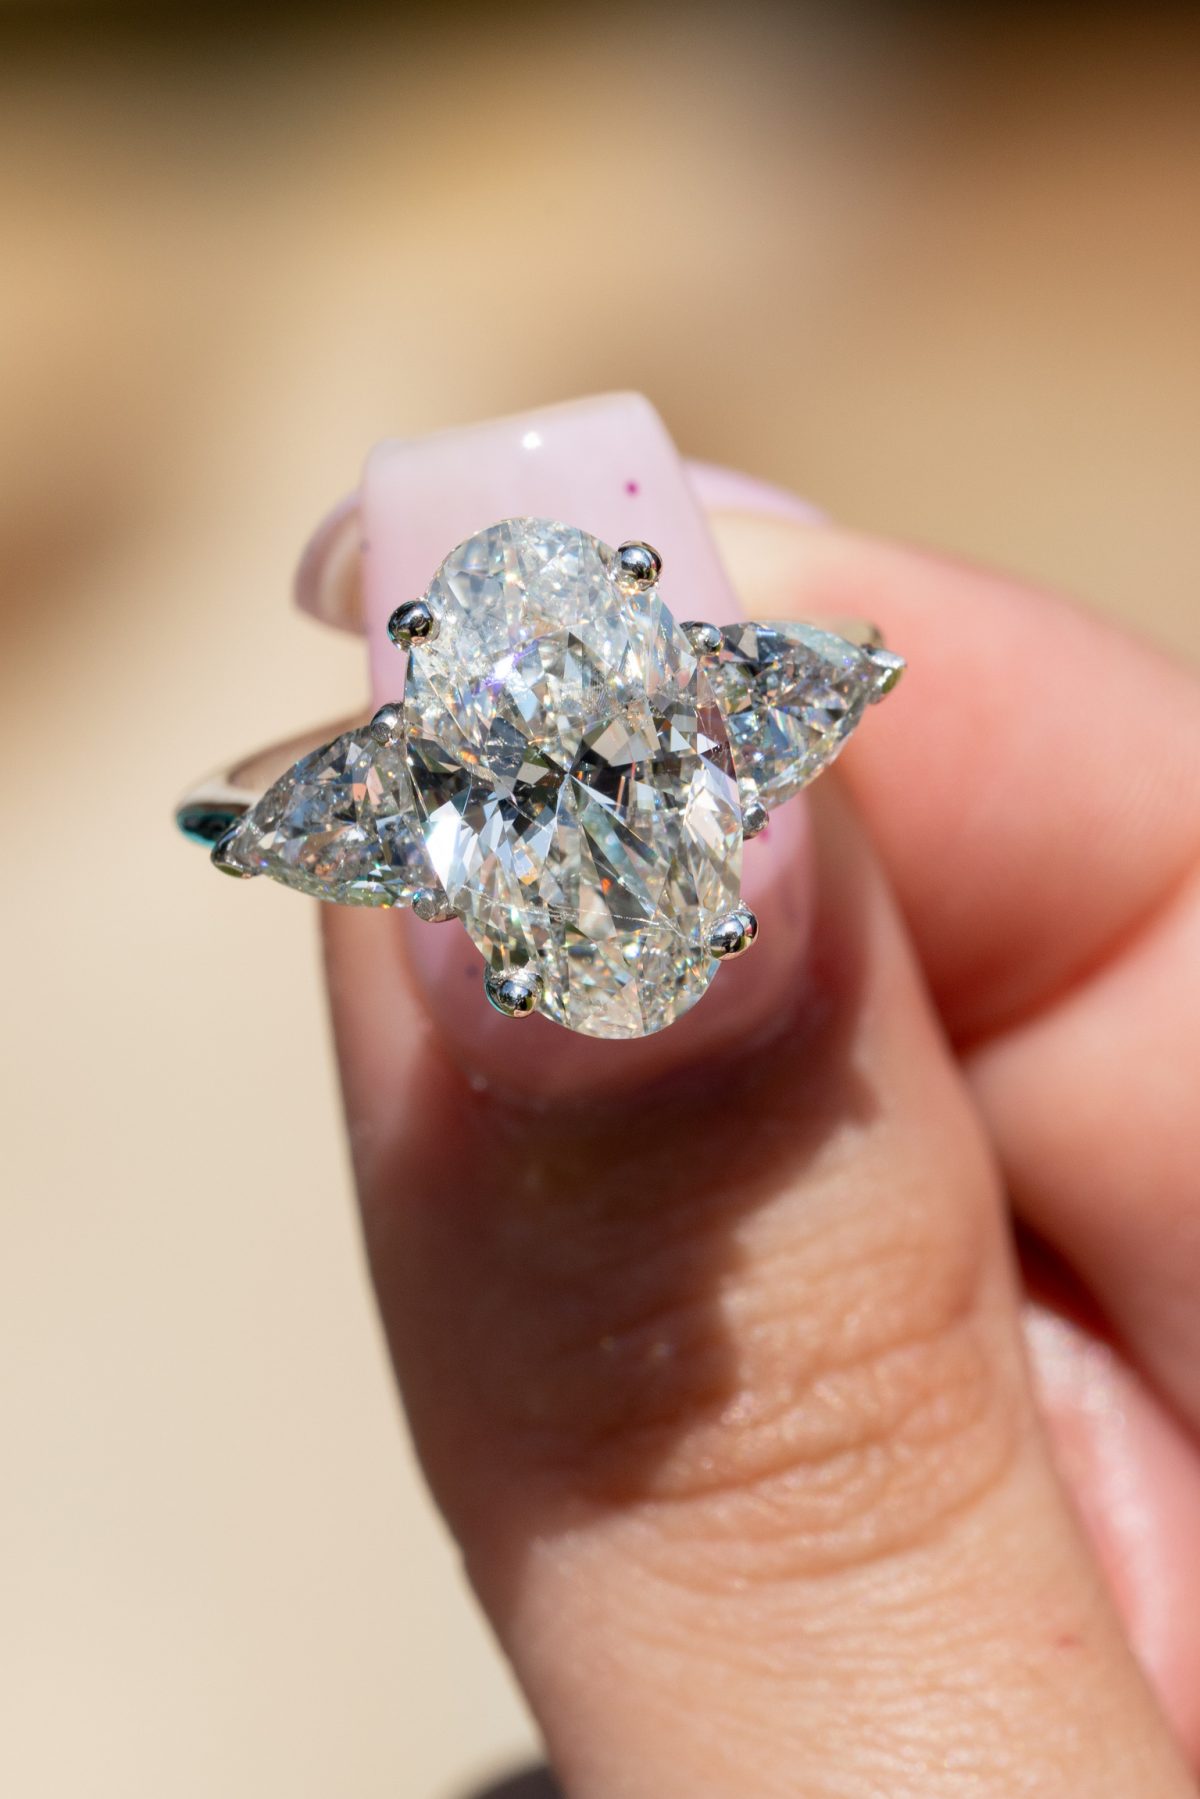 The foundation of carat pear-shaped diamond ring